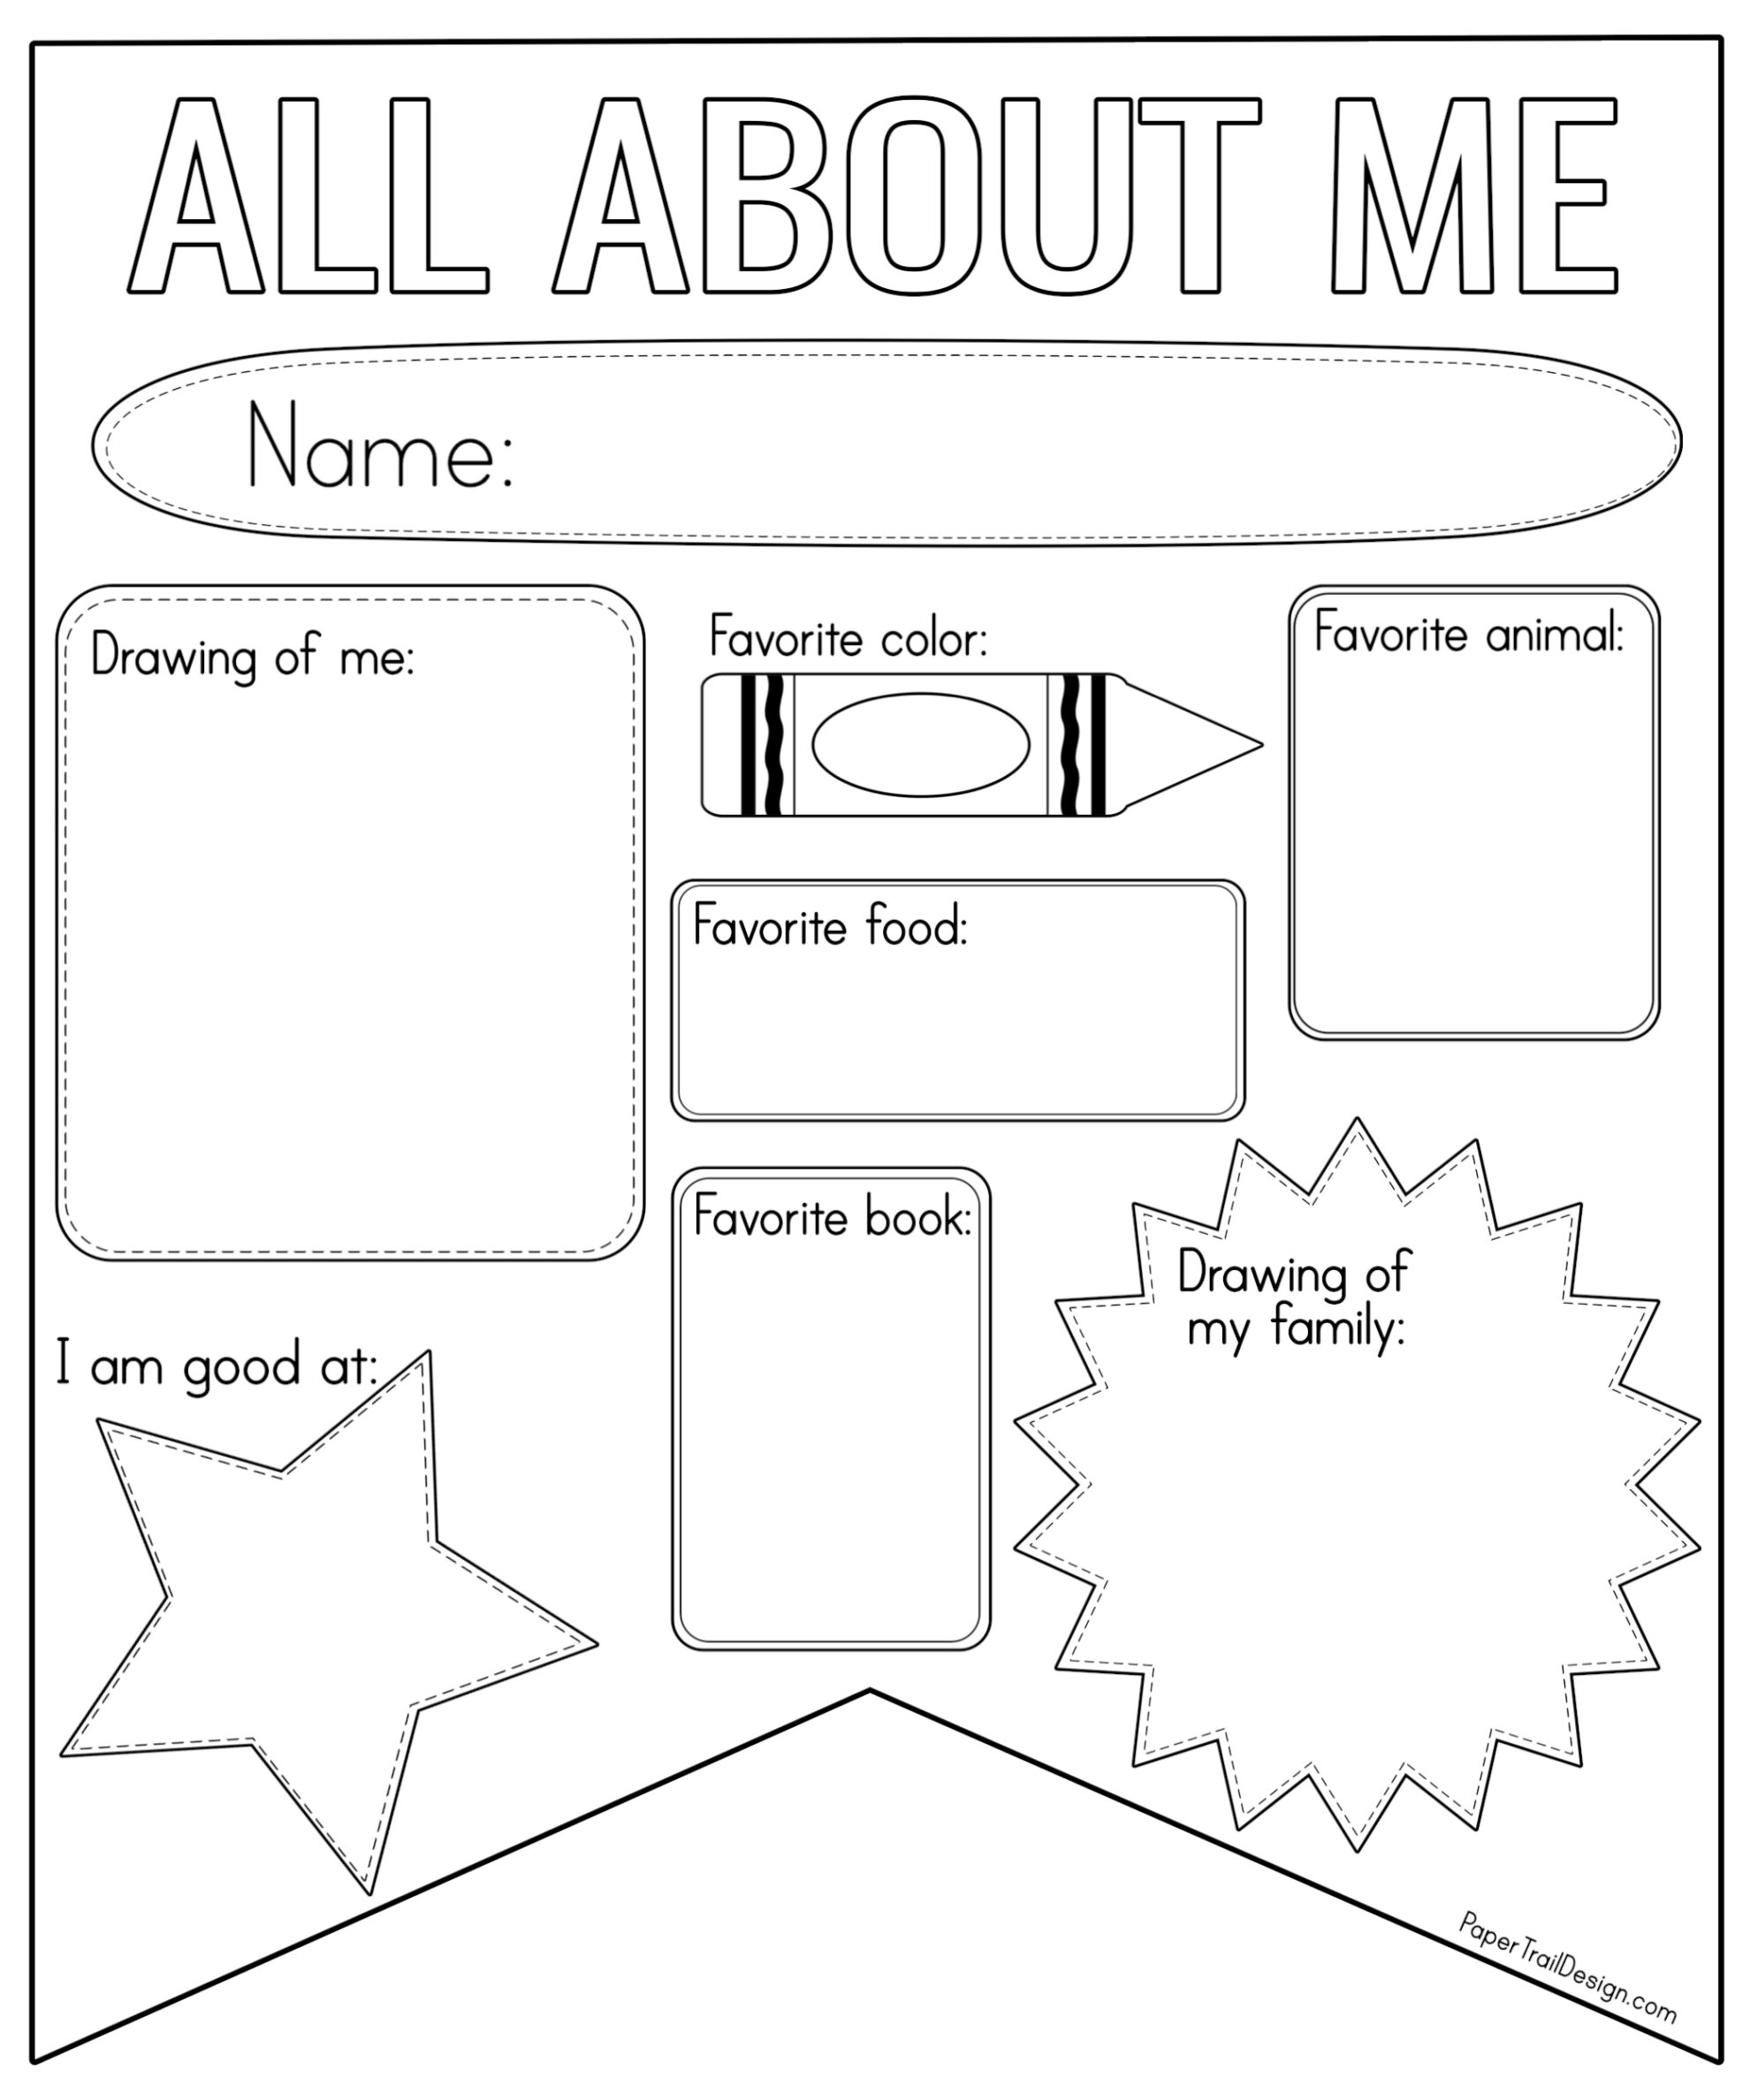 All About Me Worksheet Printable  Paper Trail Design Inside All About Me Printable Worksheet